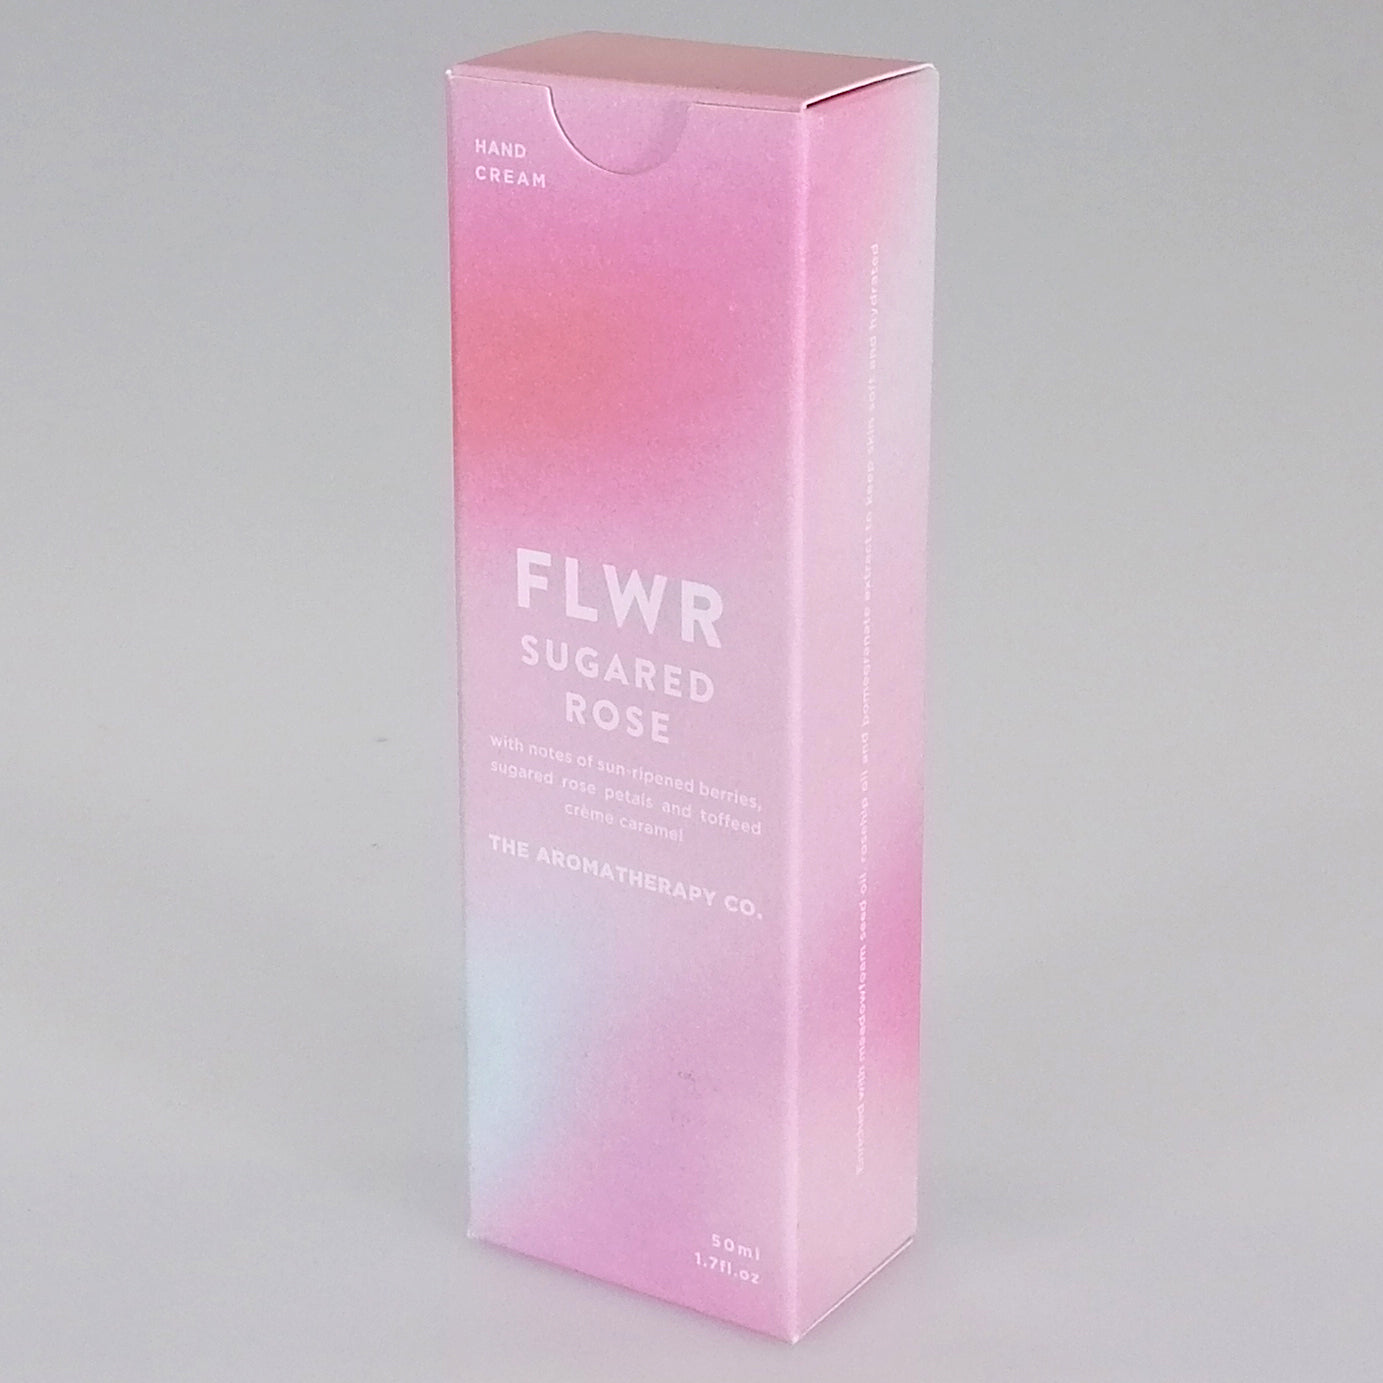 The Aromatherapy Co. FLWR Hand Cream - Sugared Rose